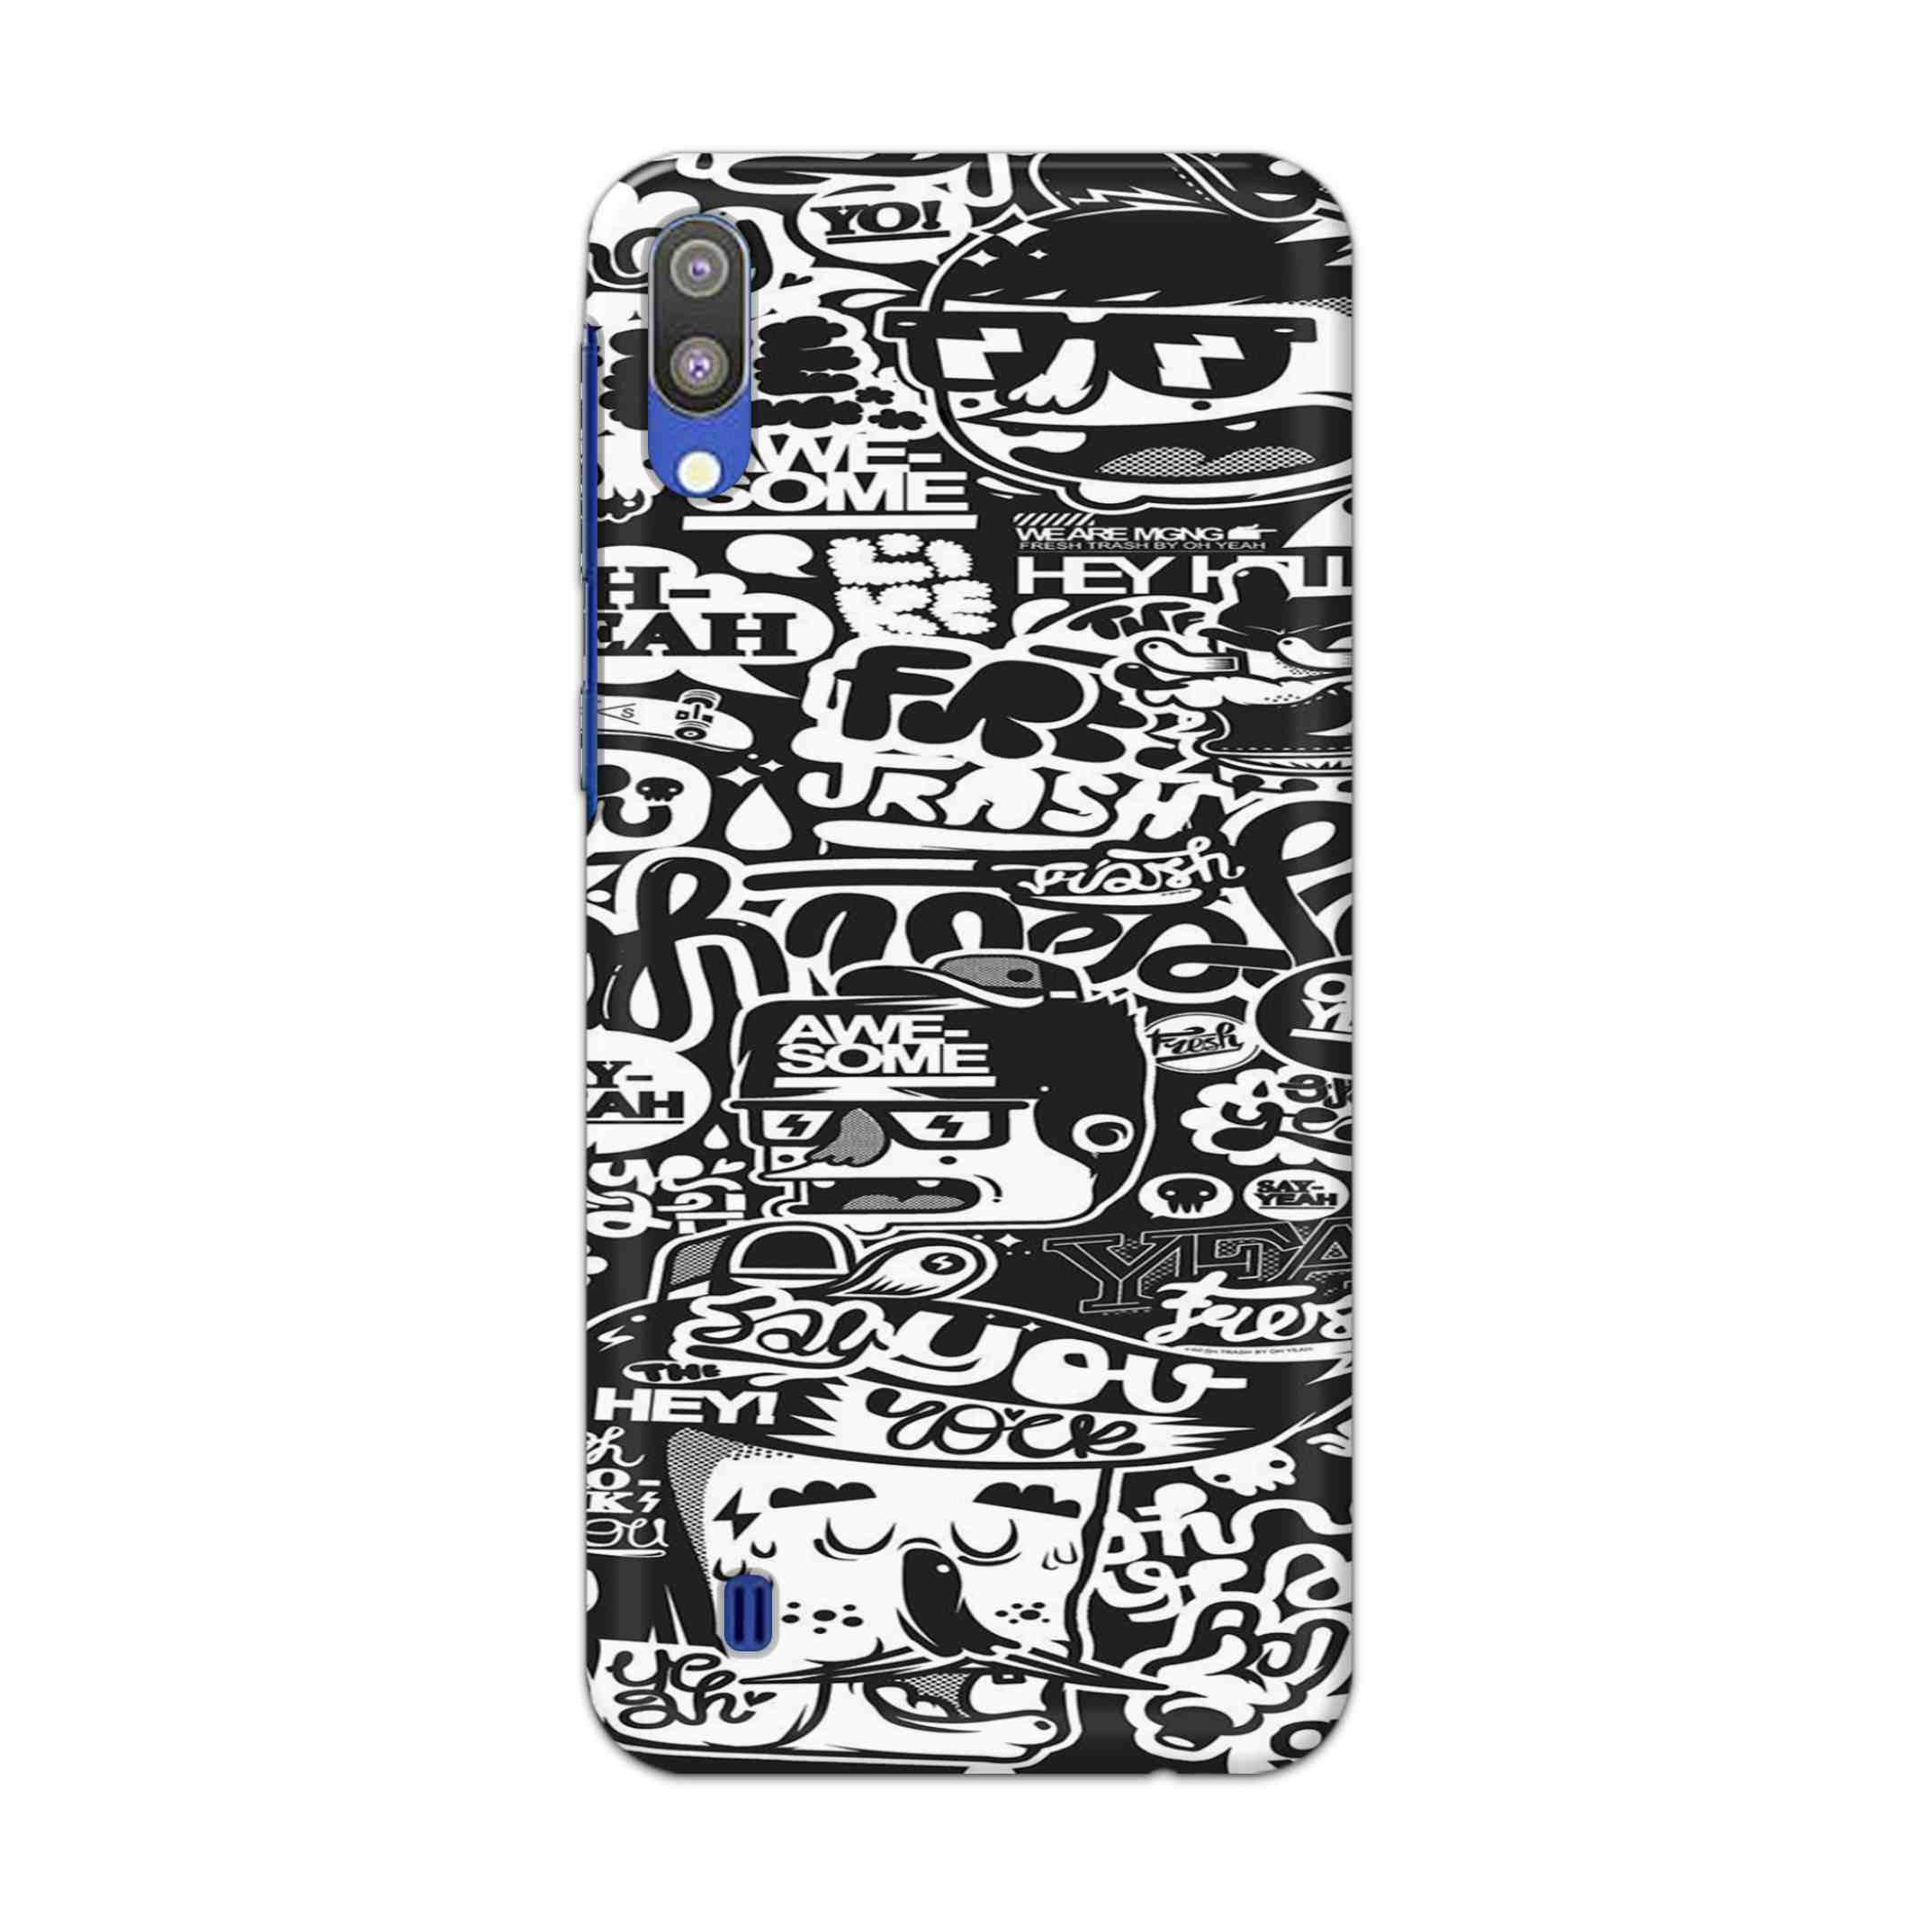 Buy Awesome Hard Back Mobile Phone Case Cover For Samsung Galaxy M10 Online